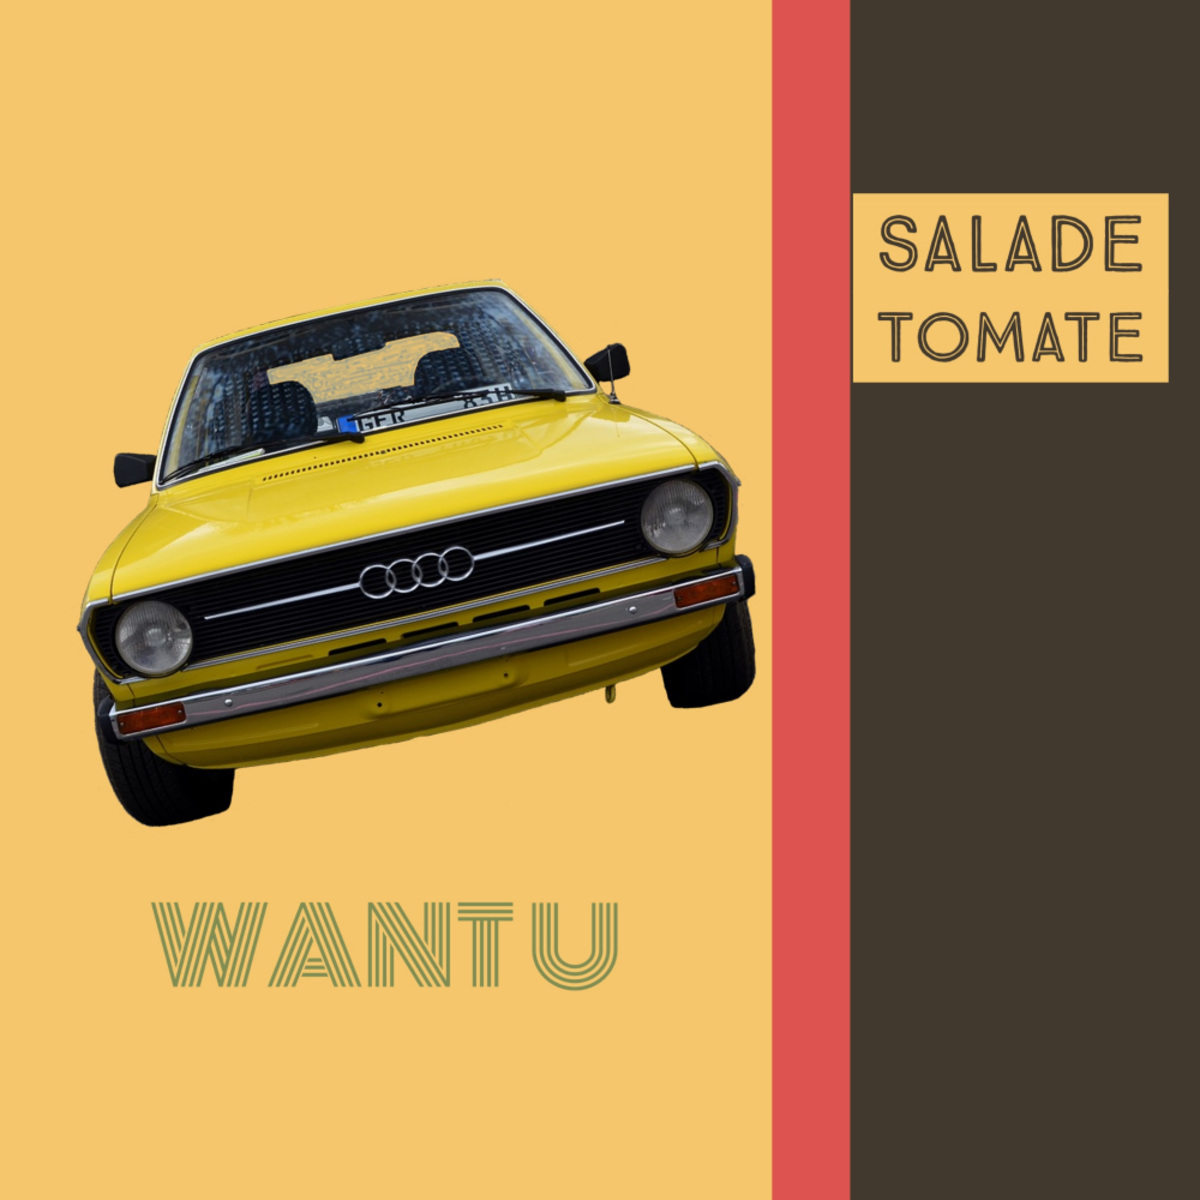 Salade Tomate - WANT YOU / MCT Luxury